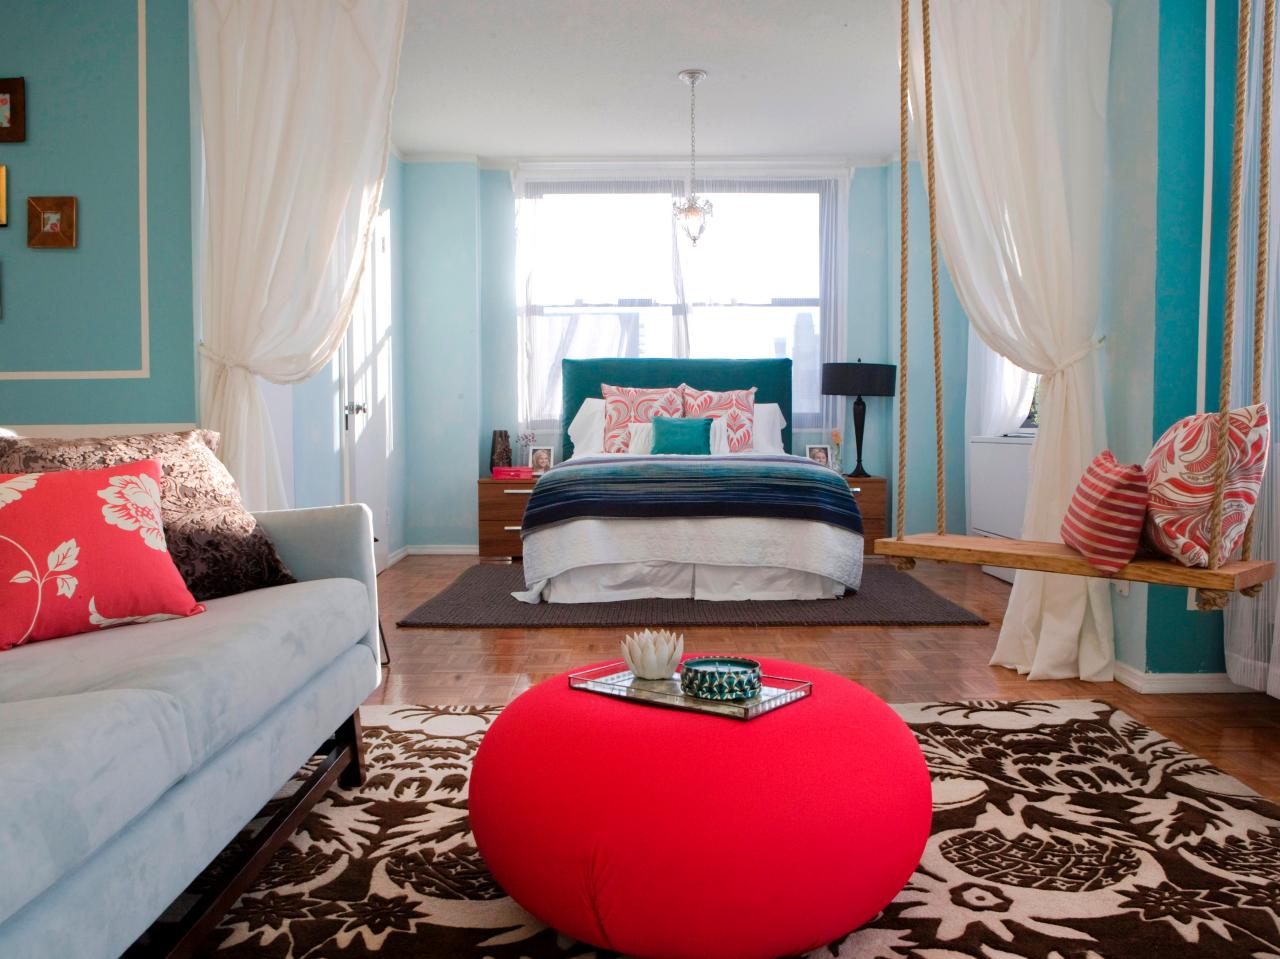 Teenage Bedroom Color Schemes: Pictures, Options  Ideas  HGTV